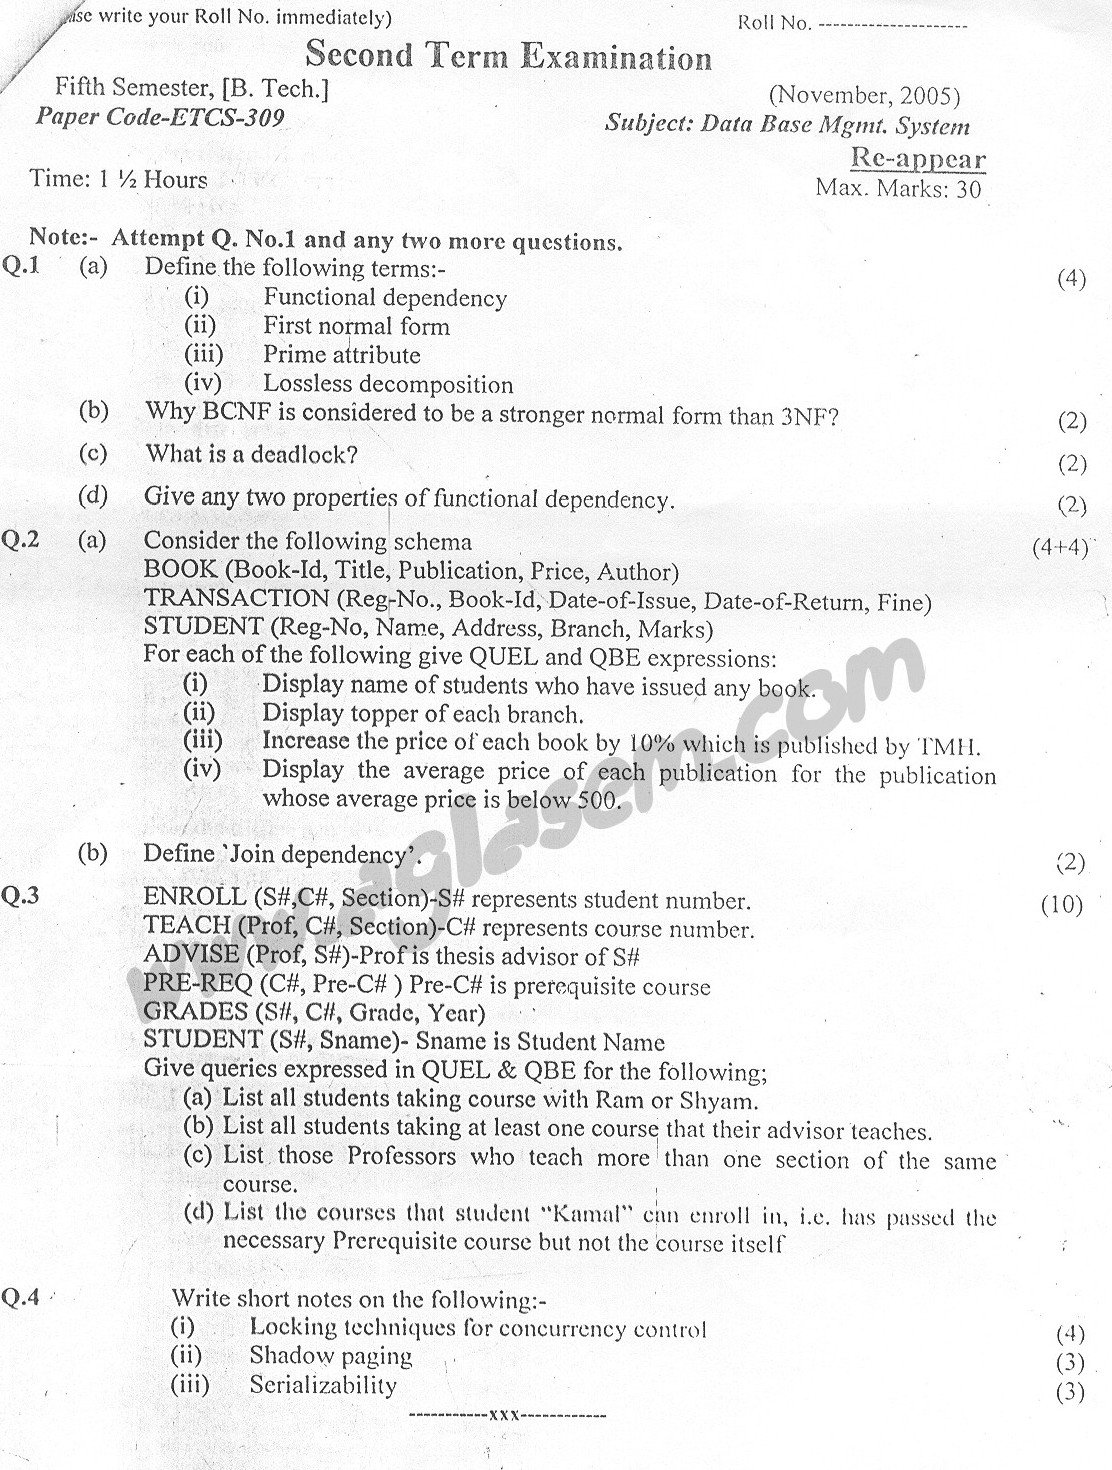 GGSIPU Question Papers Fifth Semester  Second Term 2005  ETCS-309